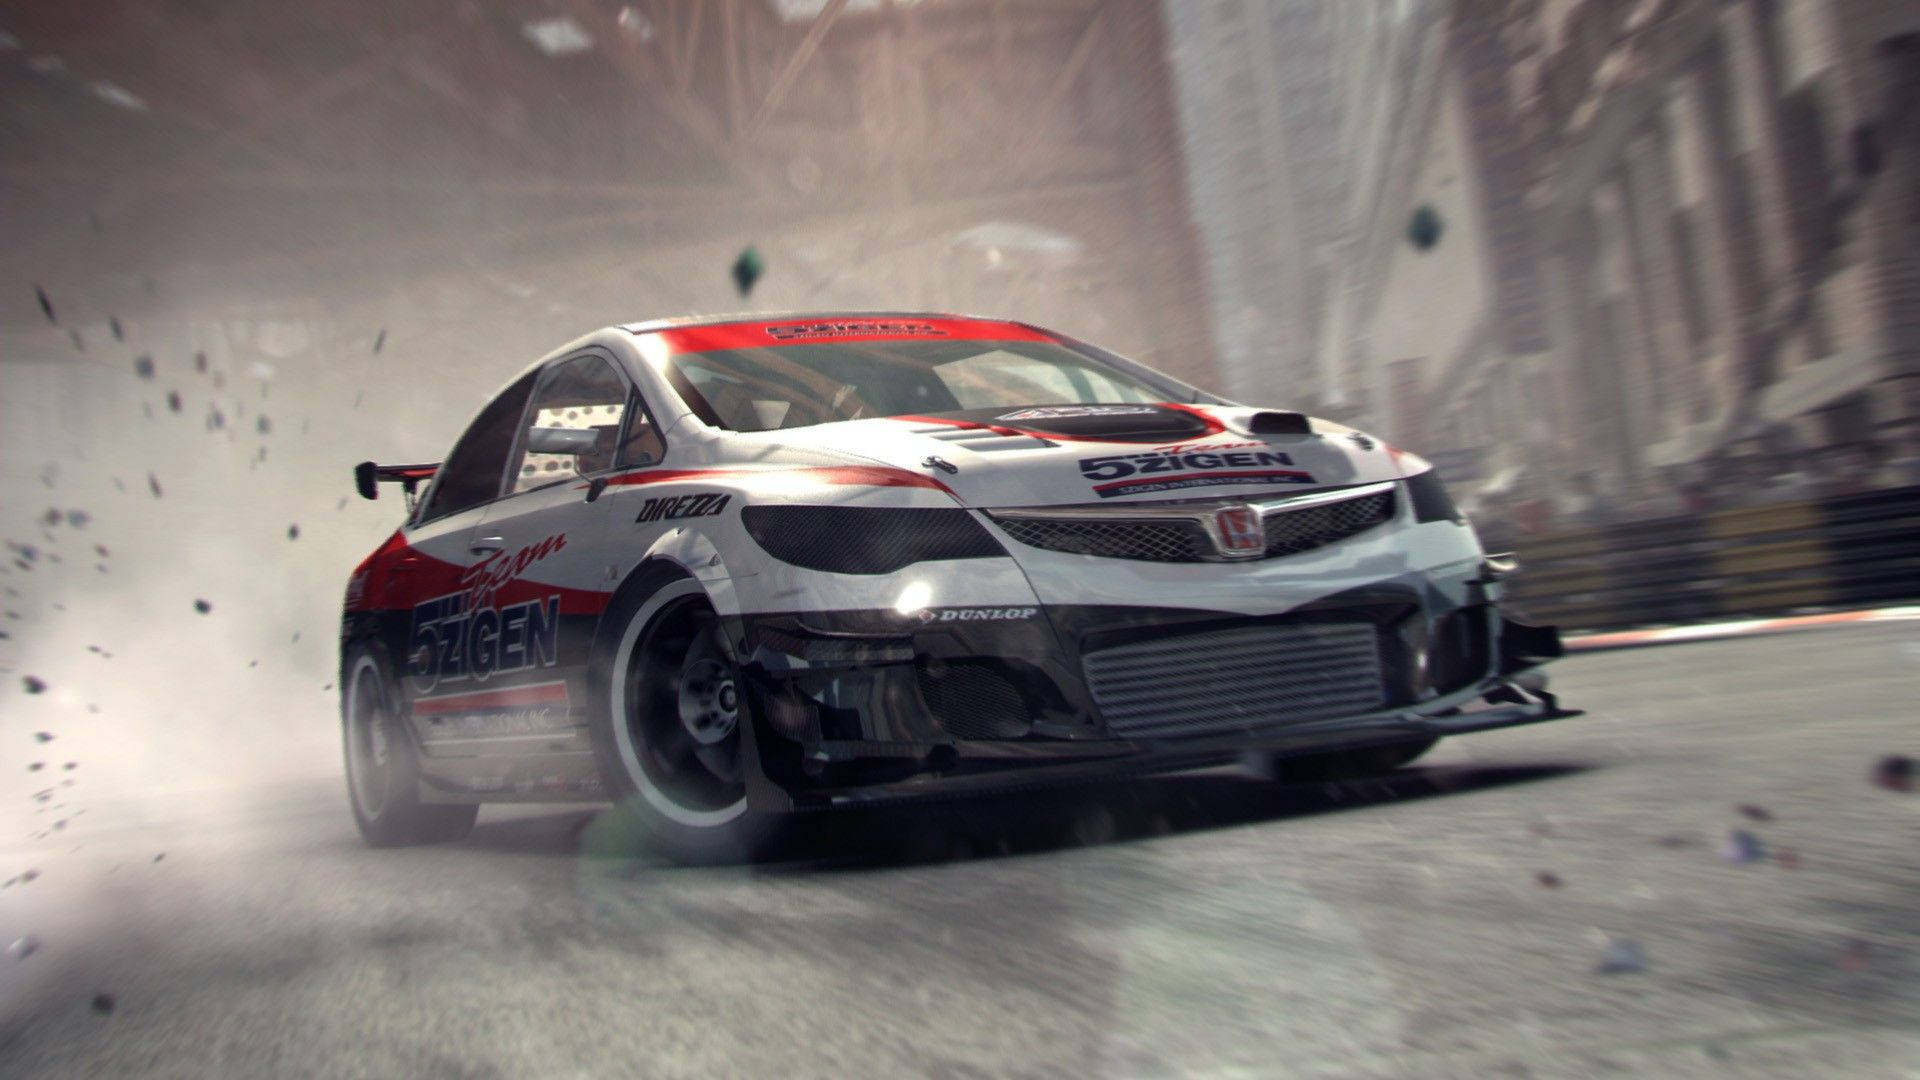 Stylized Speed - Grid 2 Featured Car Background